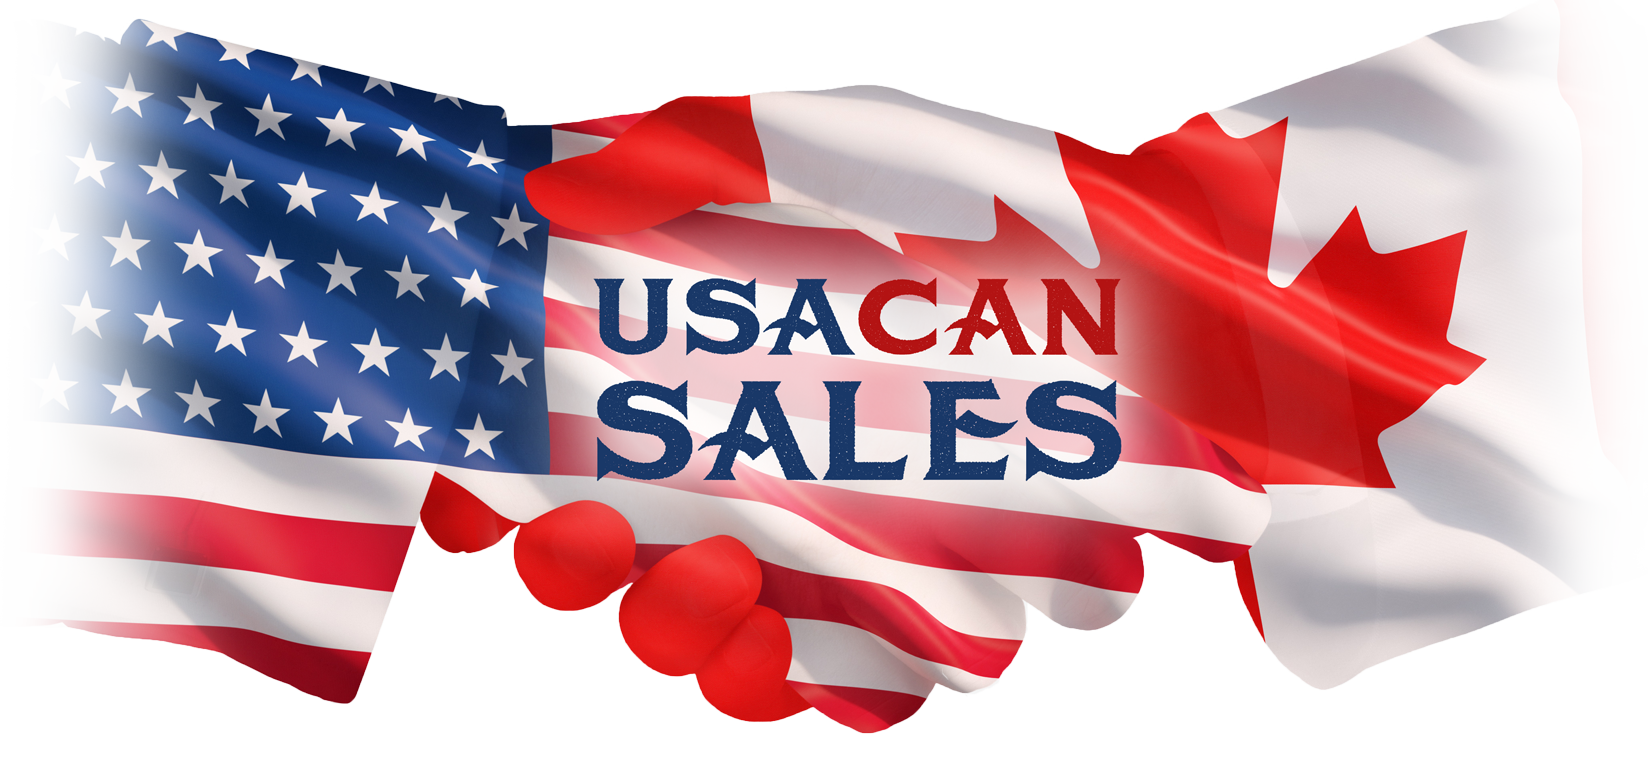 USACAN Sales